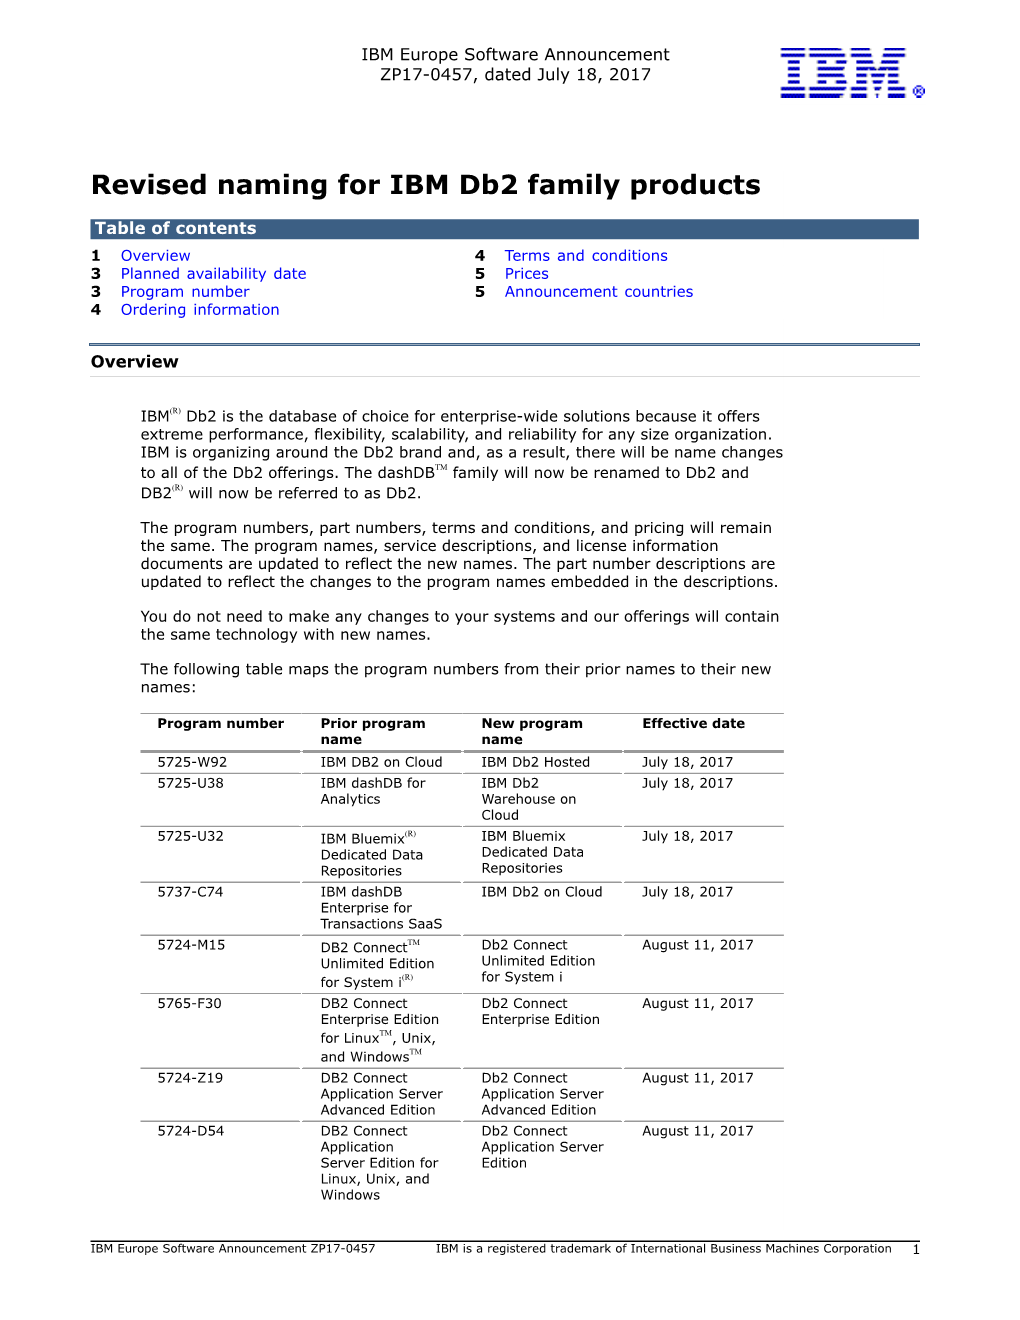 Revised Naming for IBM Db2 Family Products